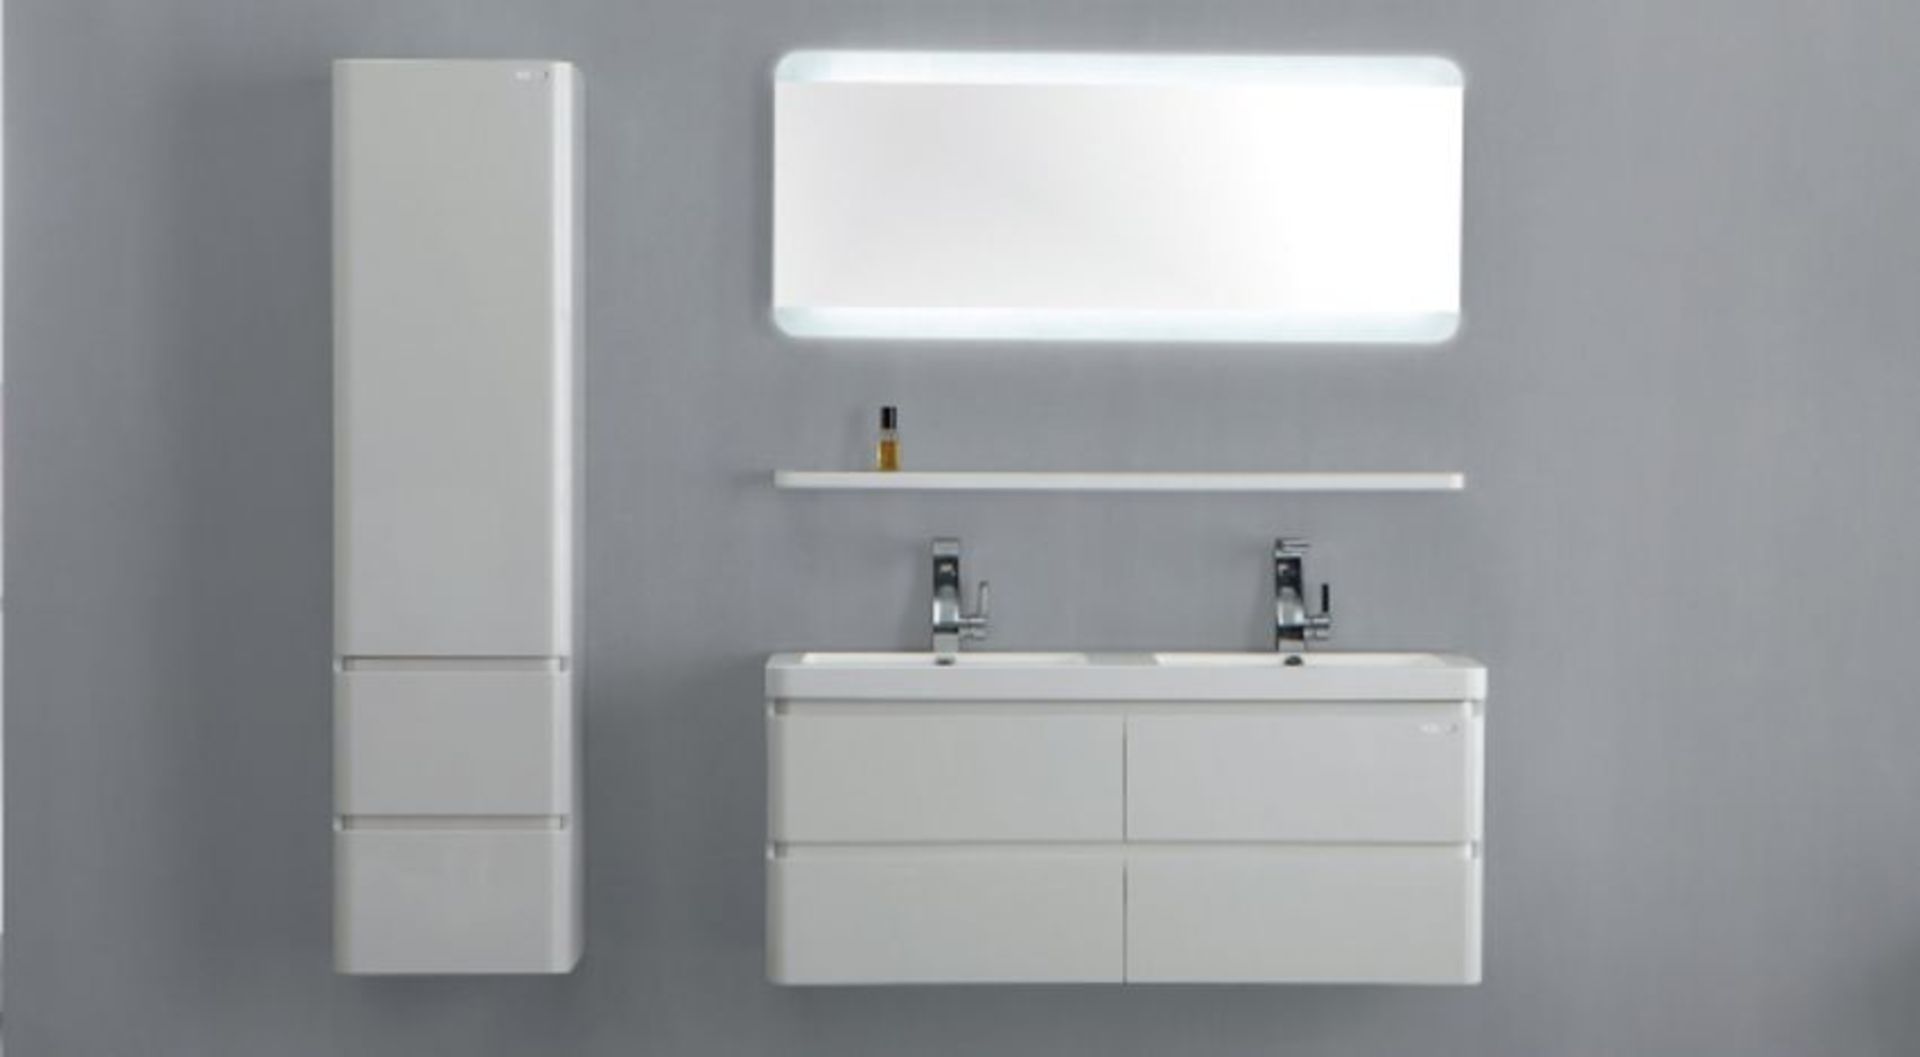 1 x Austin Bathrooms EDGE Backlit 600mm Illuminated Wall Mirror With No Touch Sensors, Rounds - Image 2 of 3